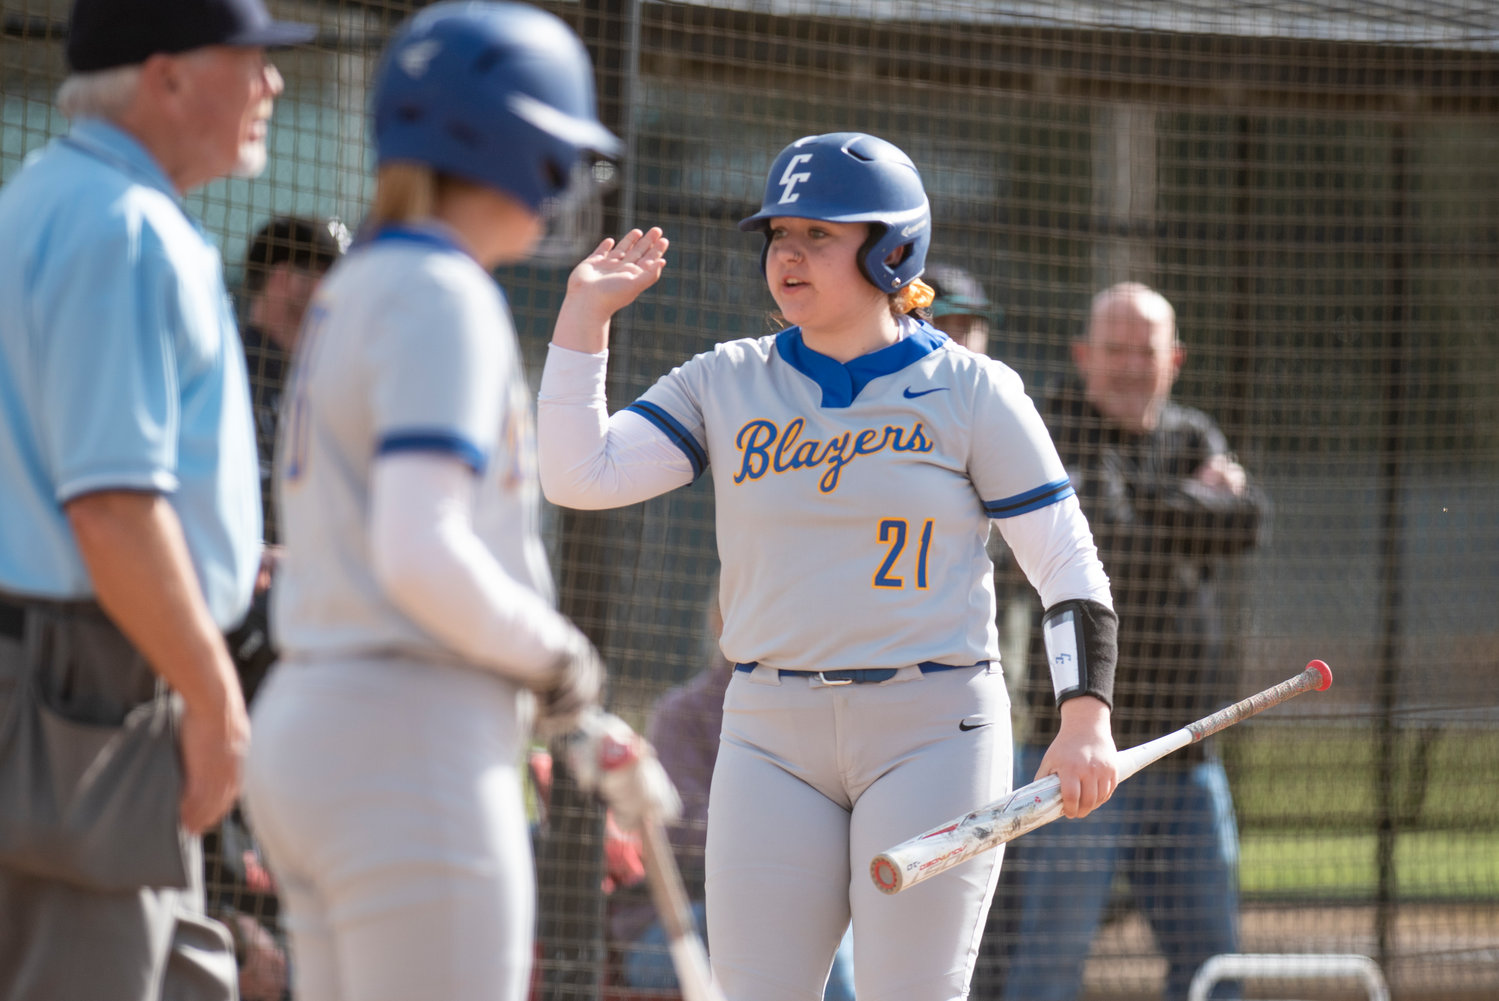 Centralia College's Kaylee Ashley (21) high-fives Kylie Baker after Baker scores a run against Chemeketa at home on March 25.